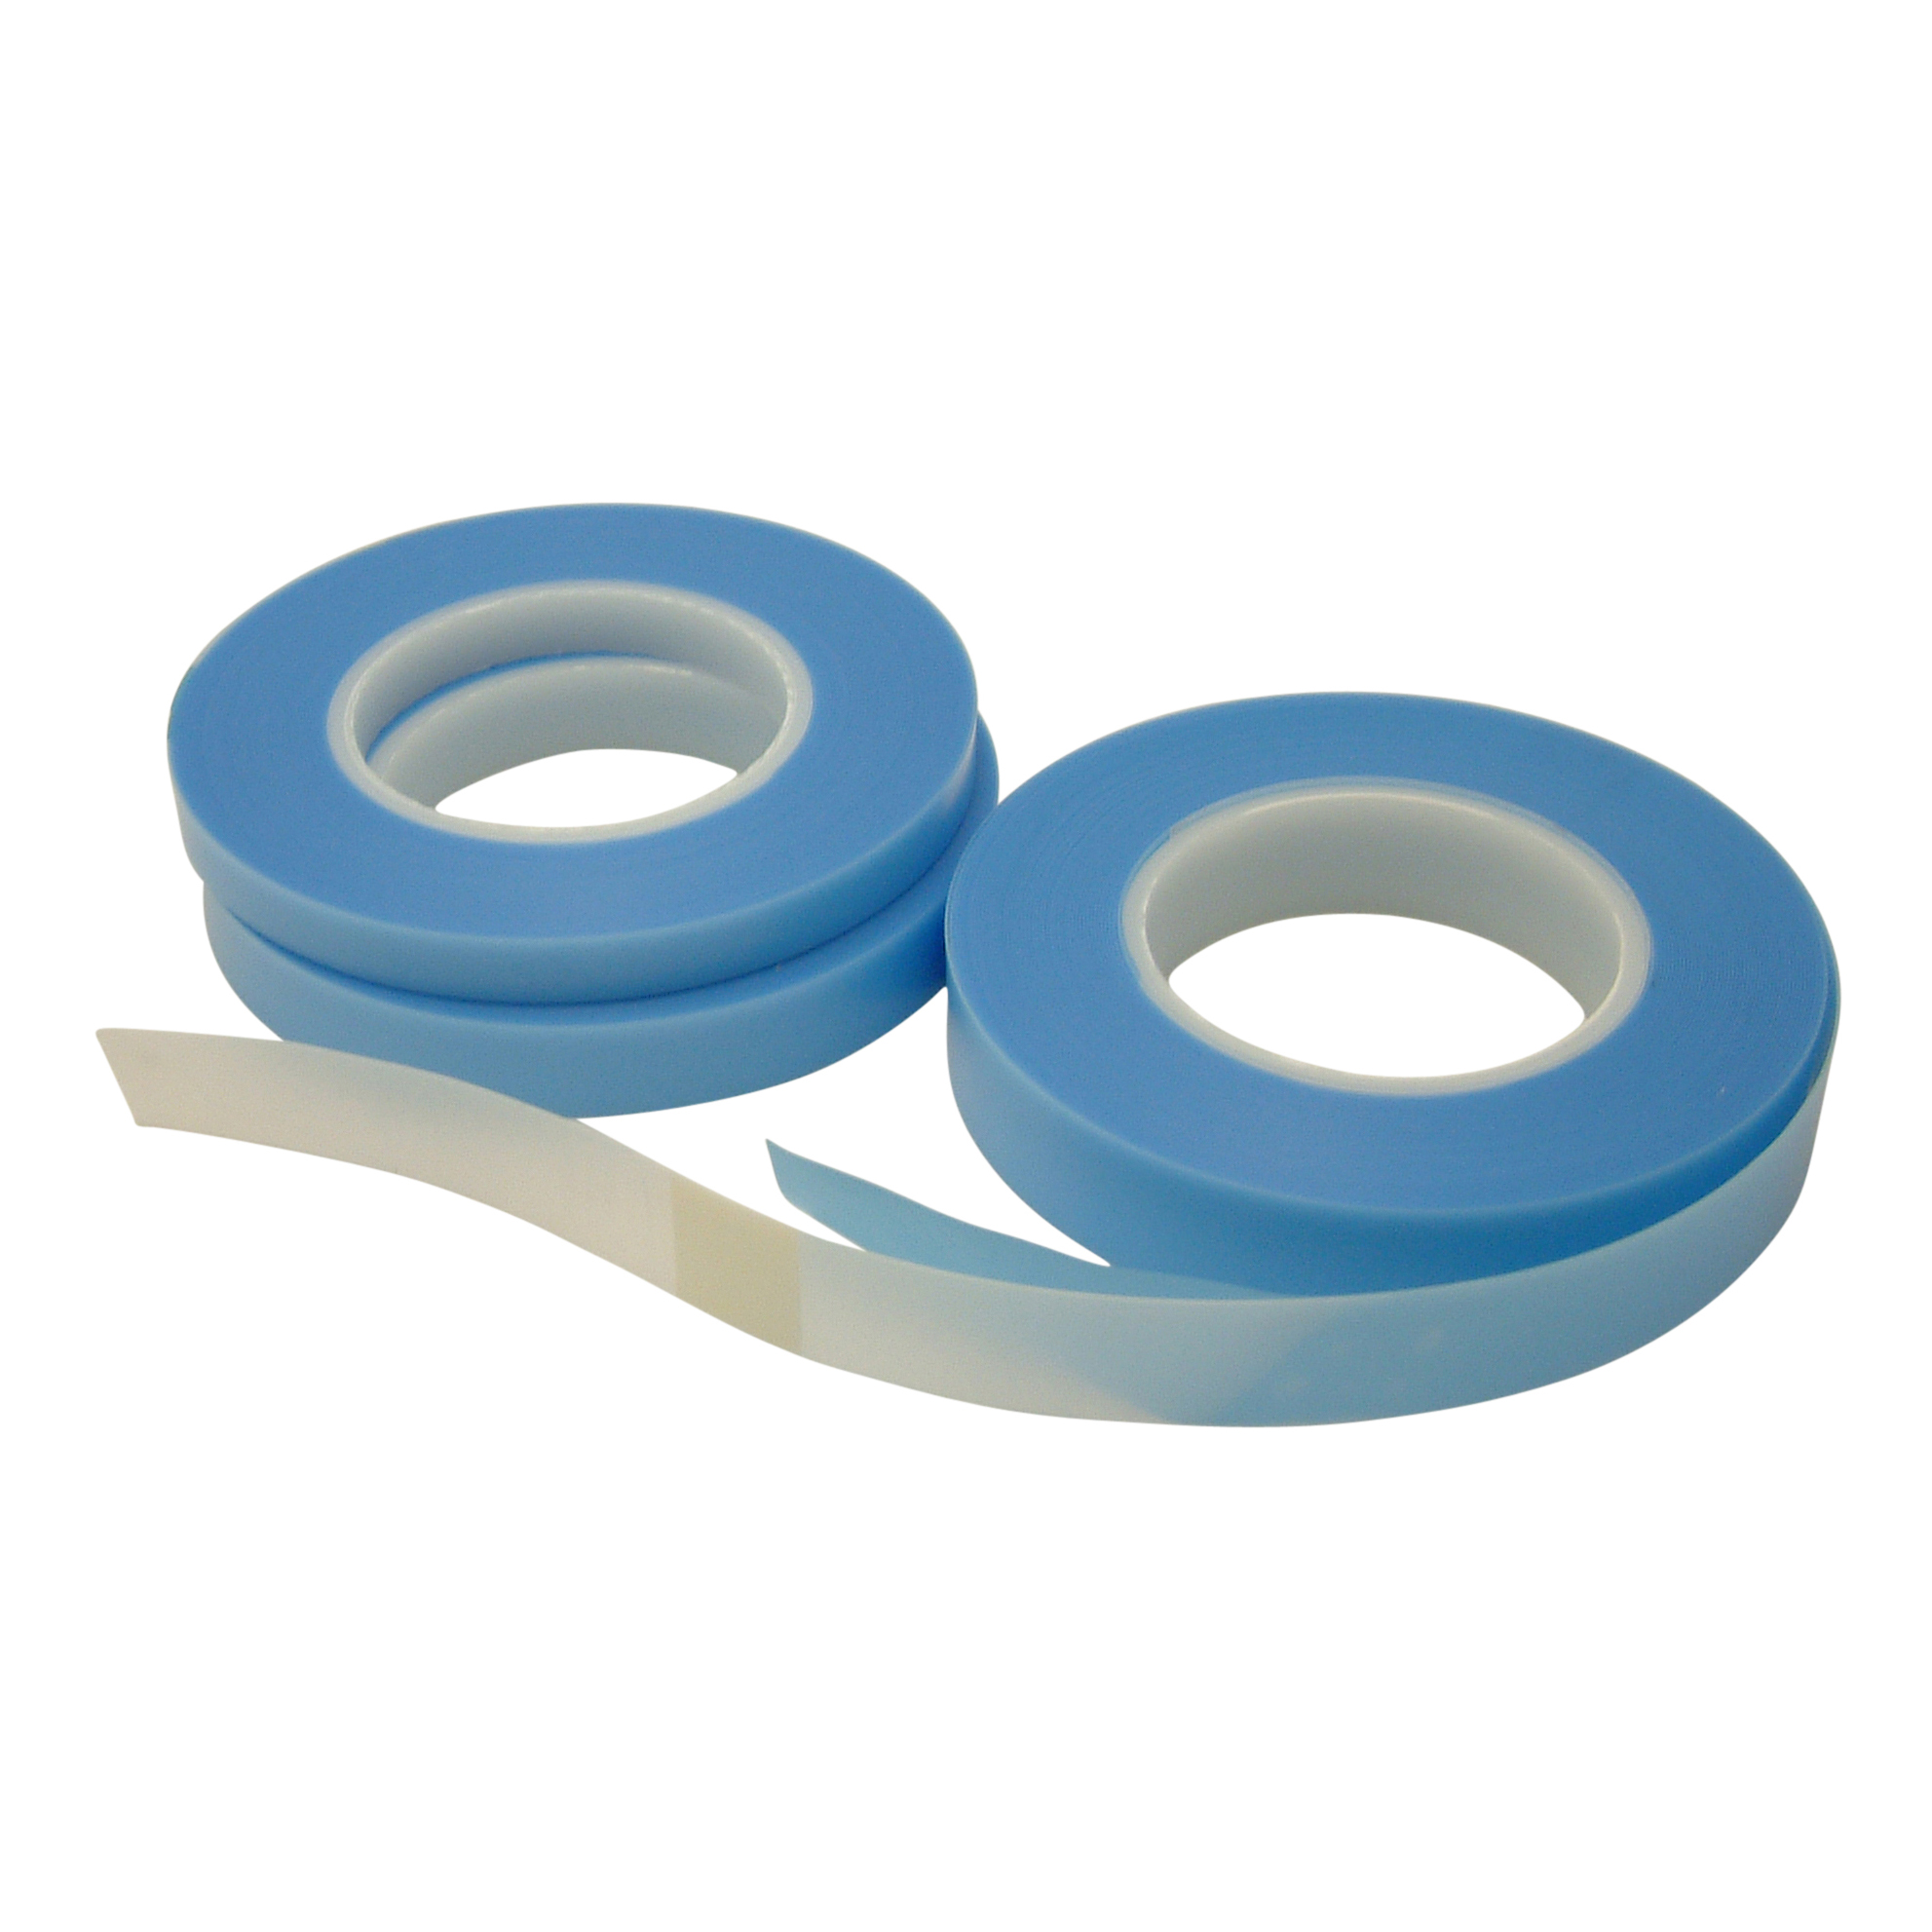 Clear Aggressive Adhesive Ideal for Squeak Reduction UHMW-20A Polyethylene Transparent Film Slick Tape and Bearings Available in Multiple Sizes : 2 X 36 yds Pack of 1 ROLL Drawers